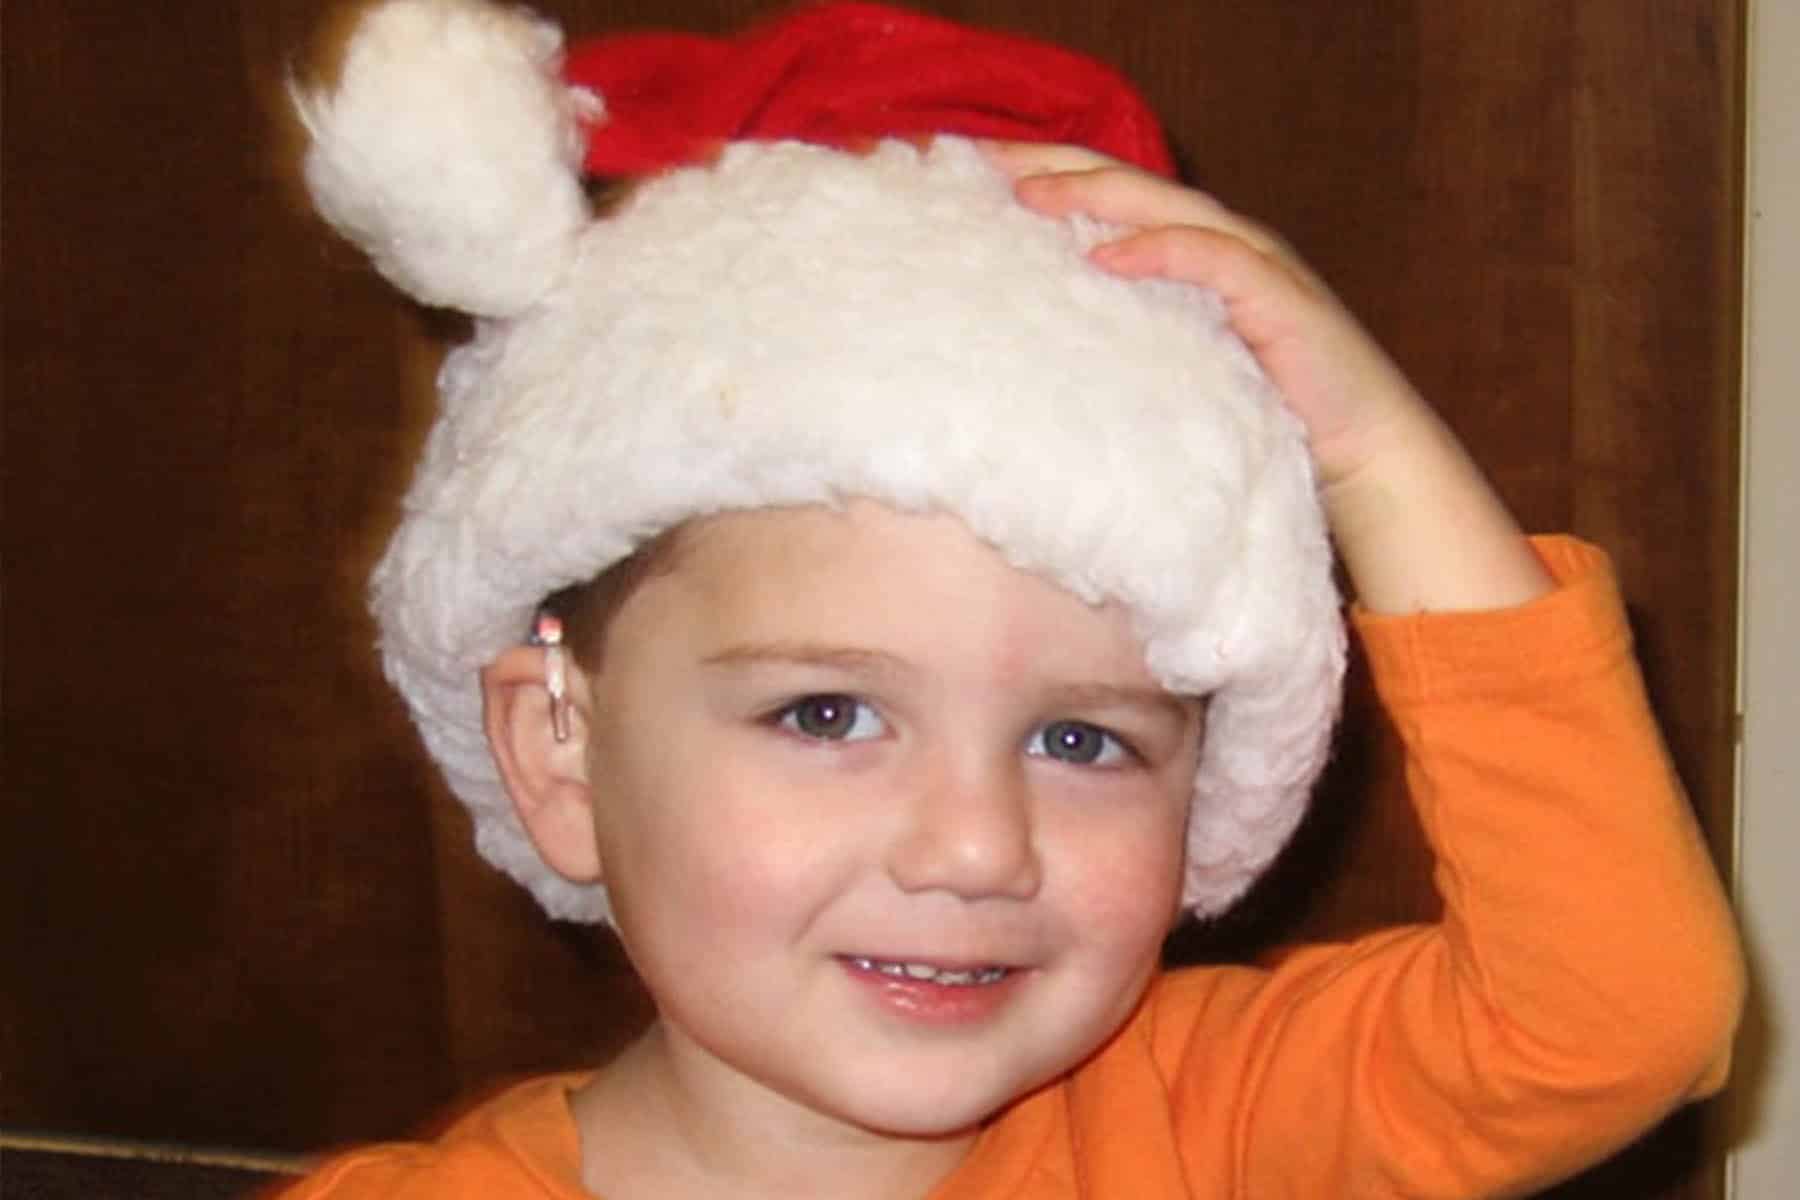 Making spirits bright: Party preparation for children with hearing loss